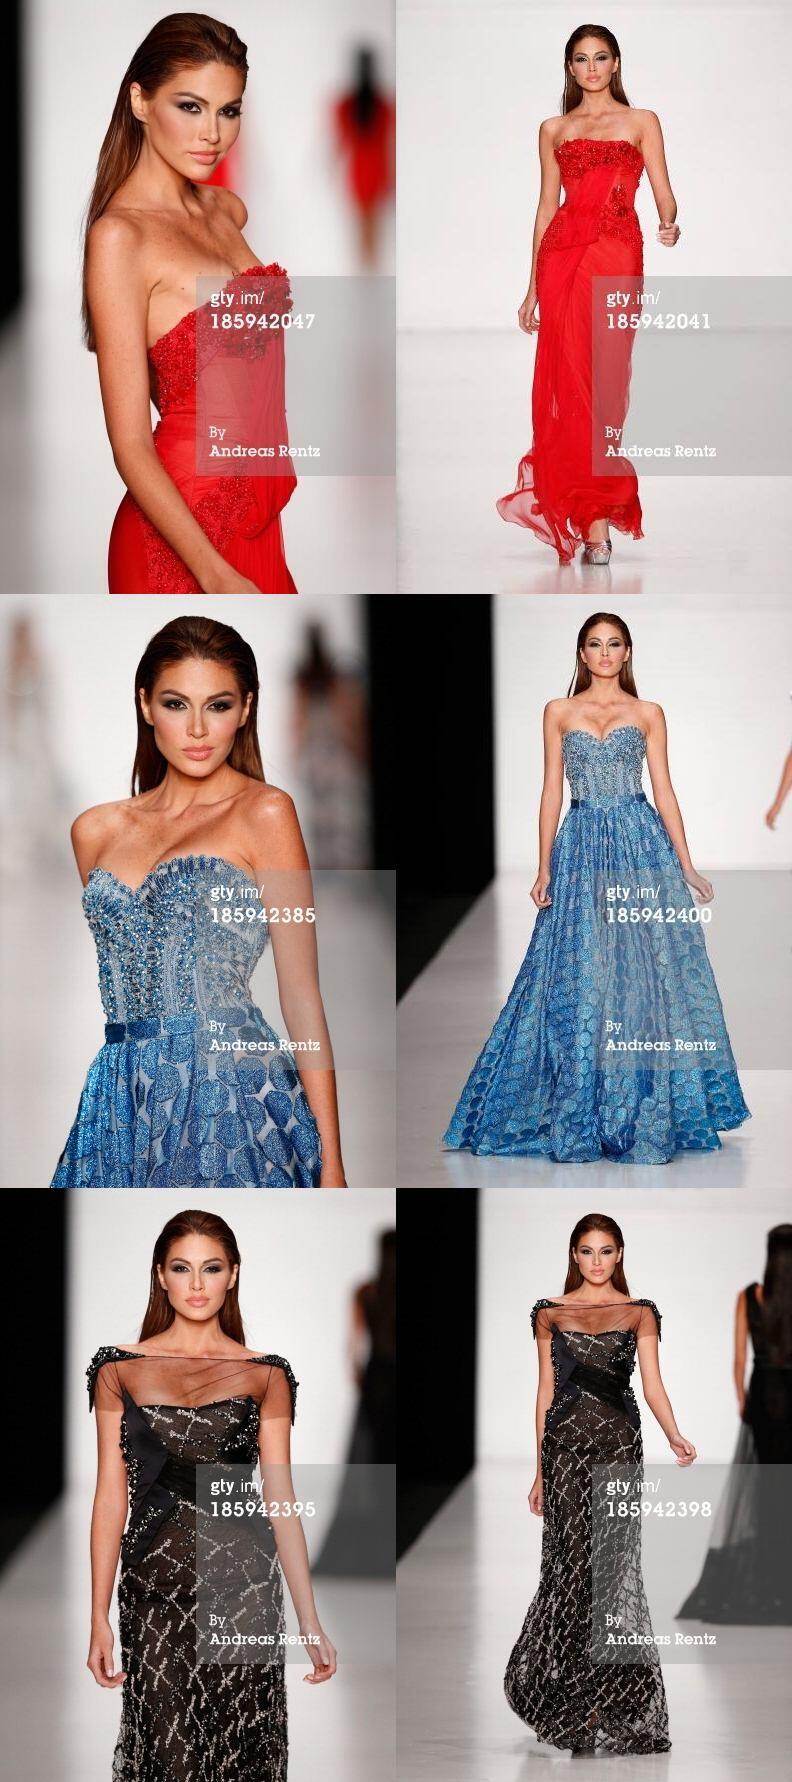  ♕ MISS UNIVERSE 2013 COVERAGE - PART 1 ♕ - Page 25 BXhhhtwCEAAQGBO